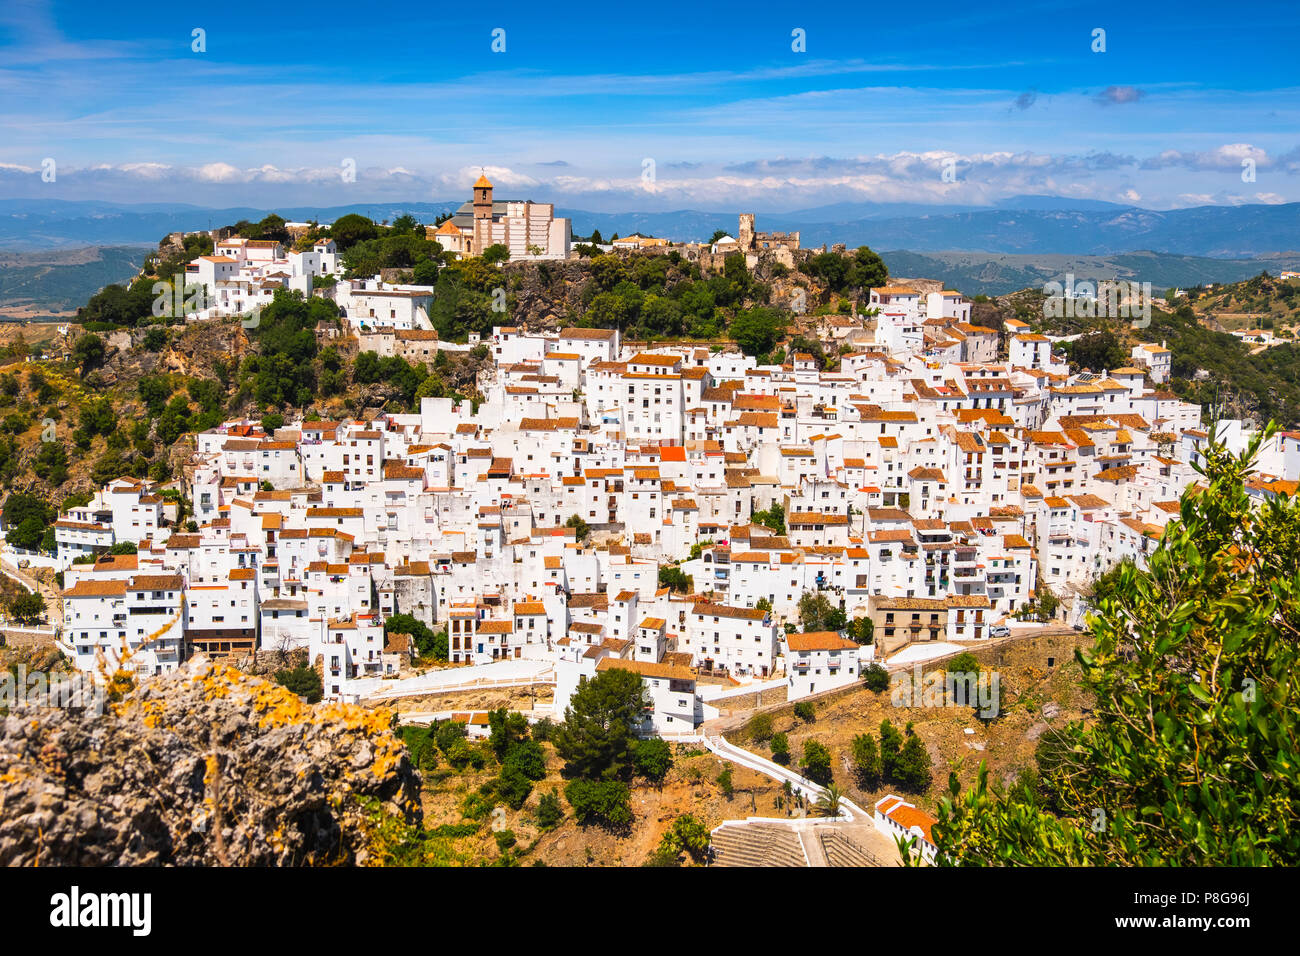 White village of Casares. Costa del Sol, Málaga province. Andalusia, Southern Spain Europe Stock Photo